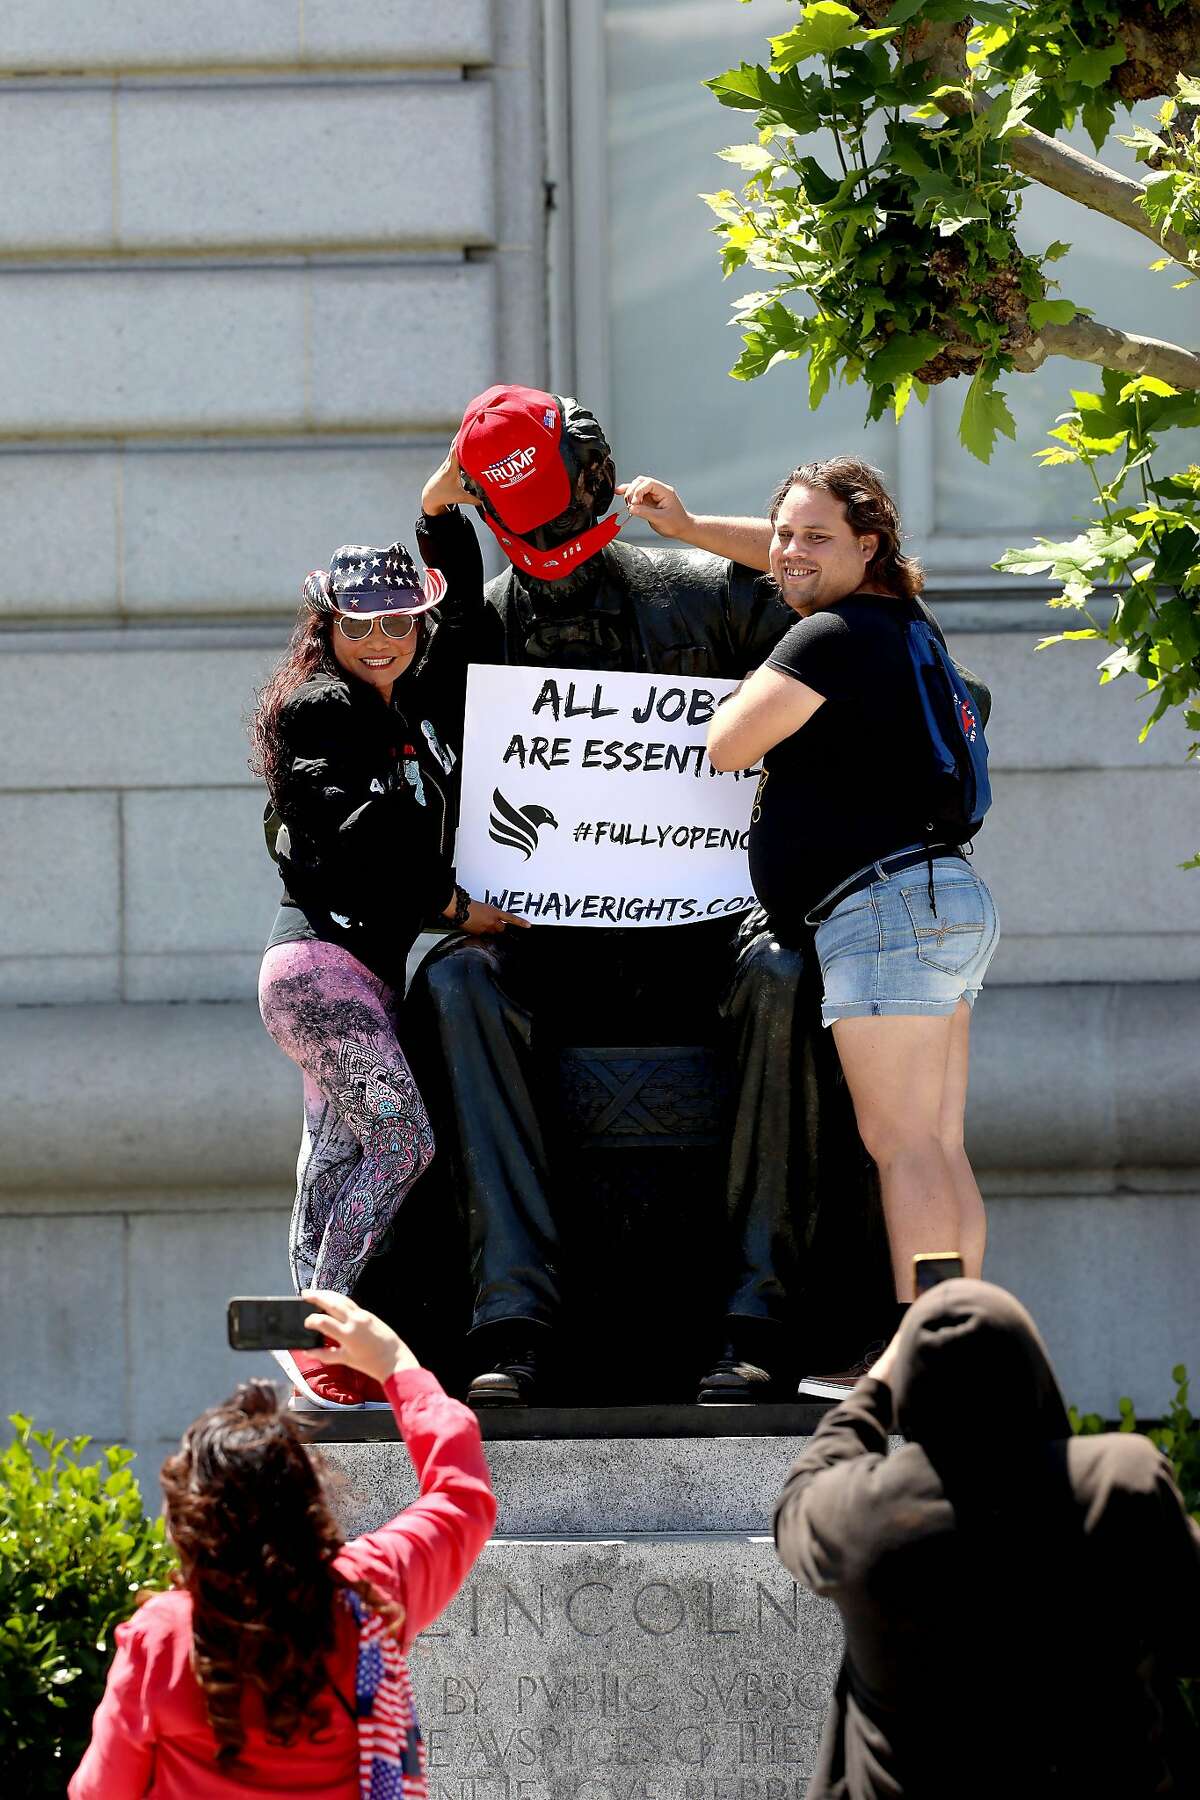 Louisa Ip, left, and Jacob Sickness, pose for photographs while placing a Trump 2020 cap on the statue depicting former United States president Abraham Lincoln as they protest during a rally in front of City Hall calling for Gov. Newsom to immediately reopen California completely in San Francisco, Calif., on Saturday, May 9, 2020. Protesters argued they've been stripped of their rights. "The whole thing is a plandemic," Ip said. "My belief is the whole thing is planned to take our privacy away, plus they wanted to take our constitutional rights away." After climbing down the statue Sockness said, "I'm trying to get my freedom back."